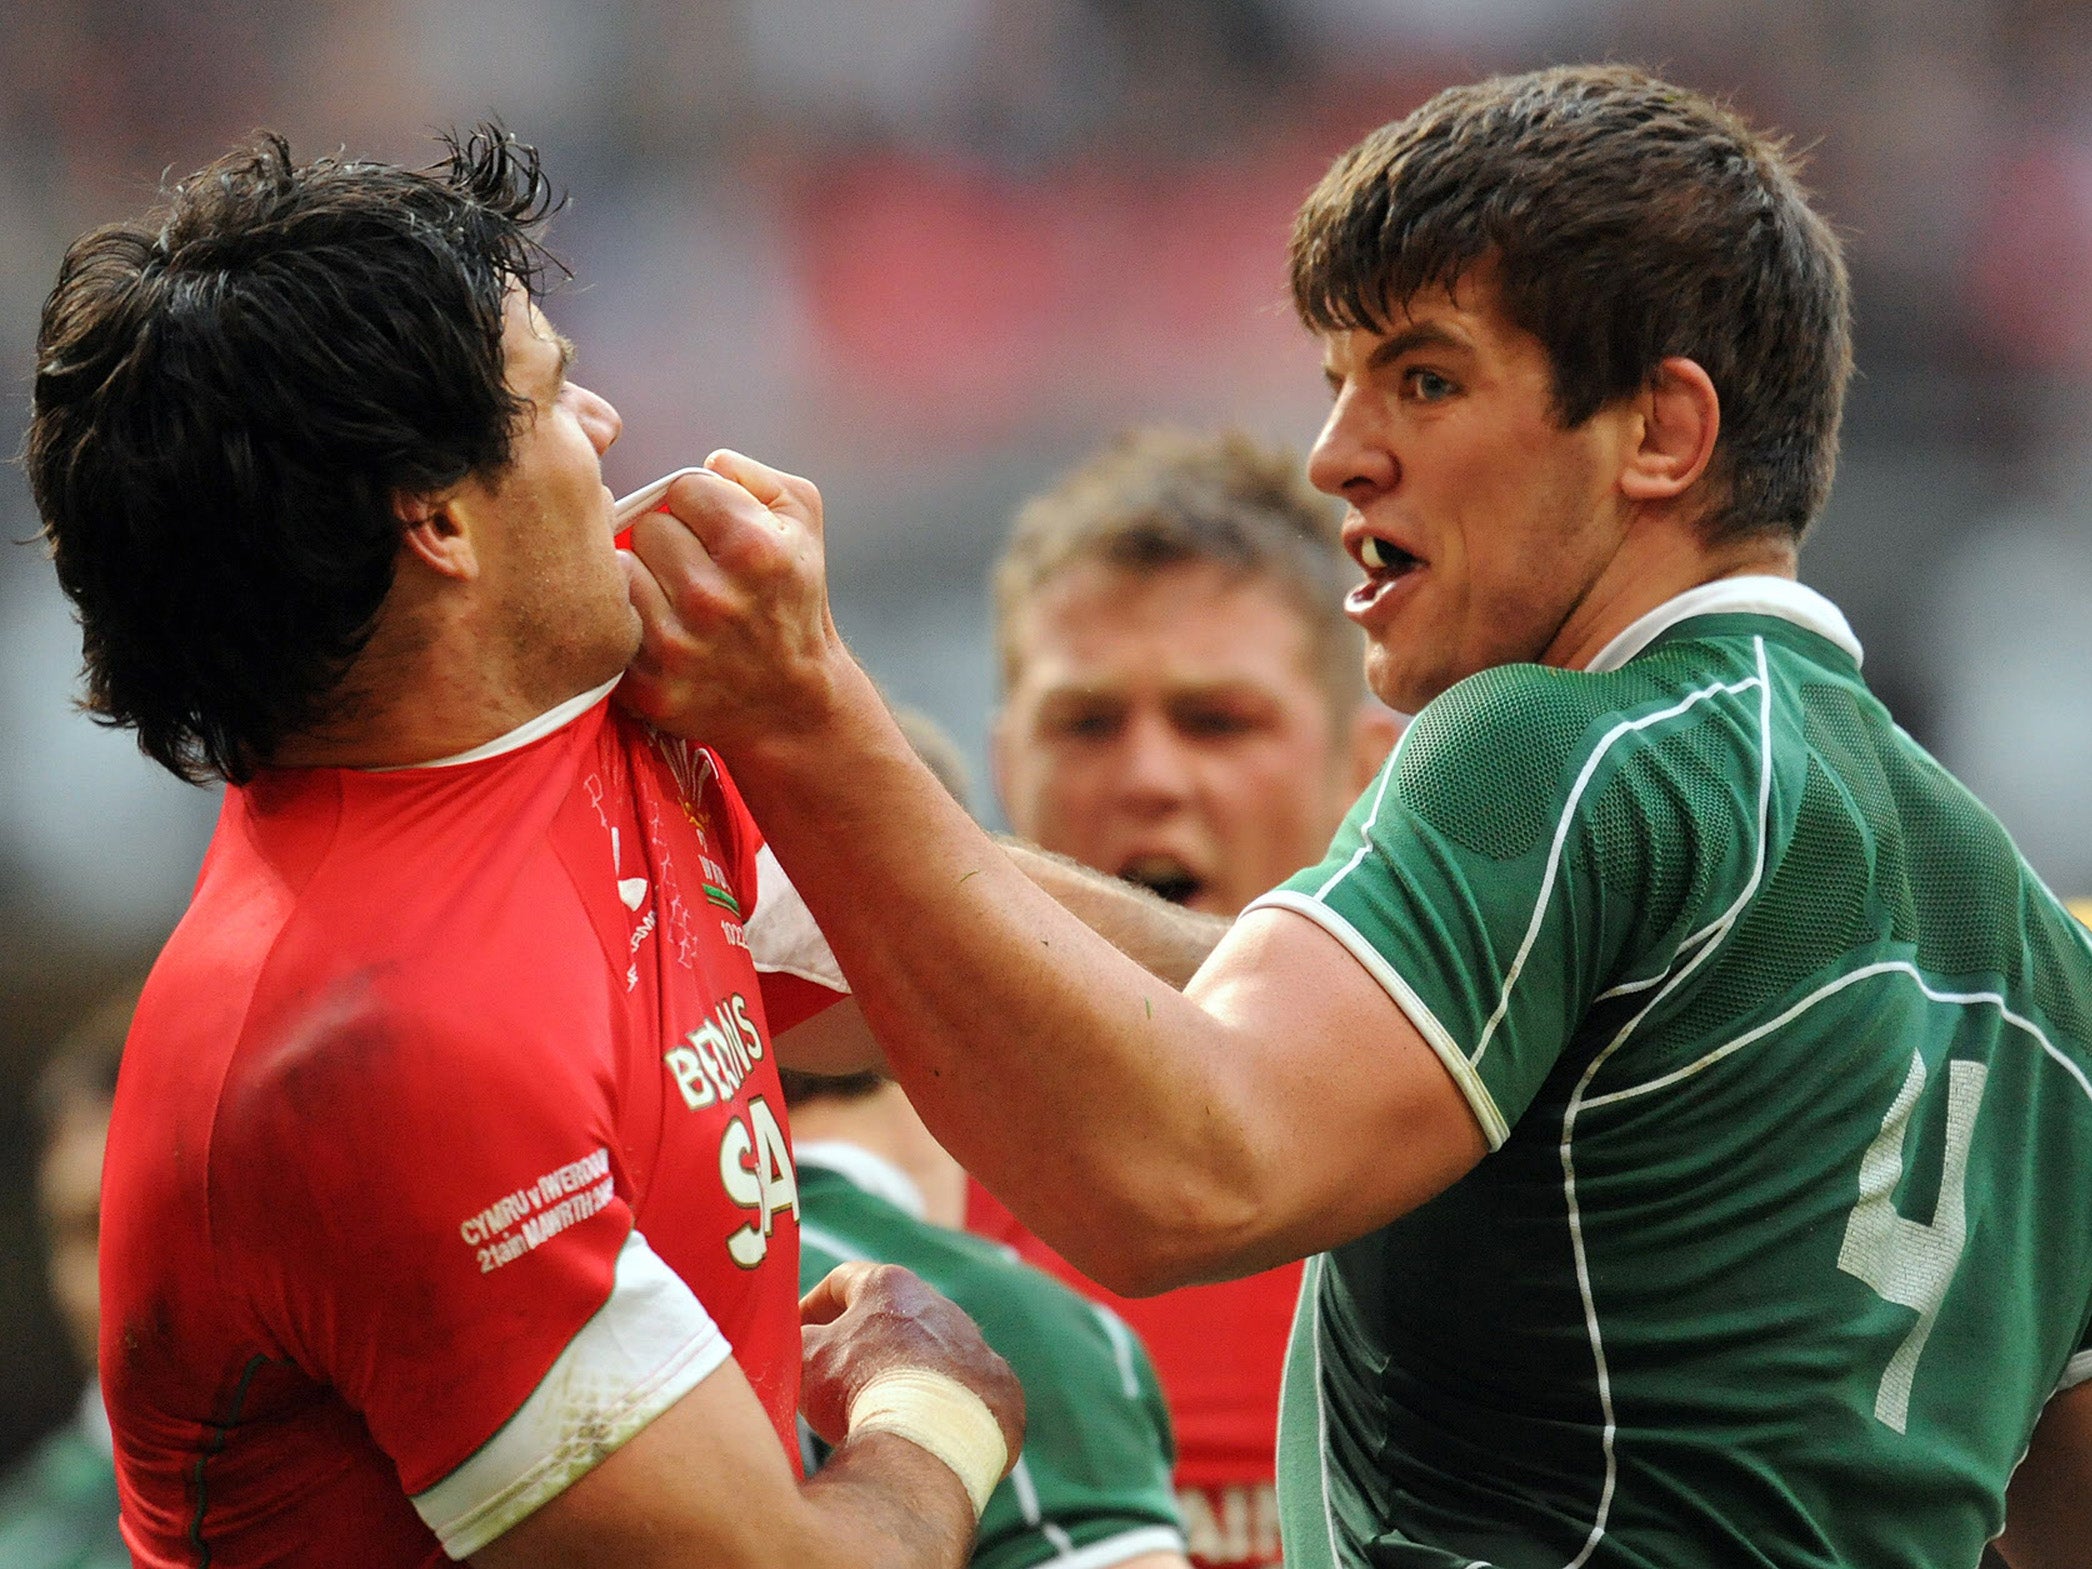 Mike Phillips clashes with Donncha O'Callaghan in the 2009 Six Nations